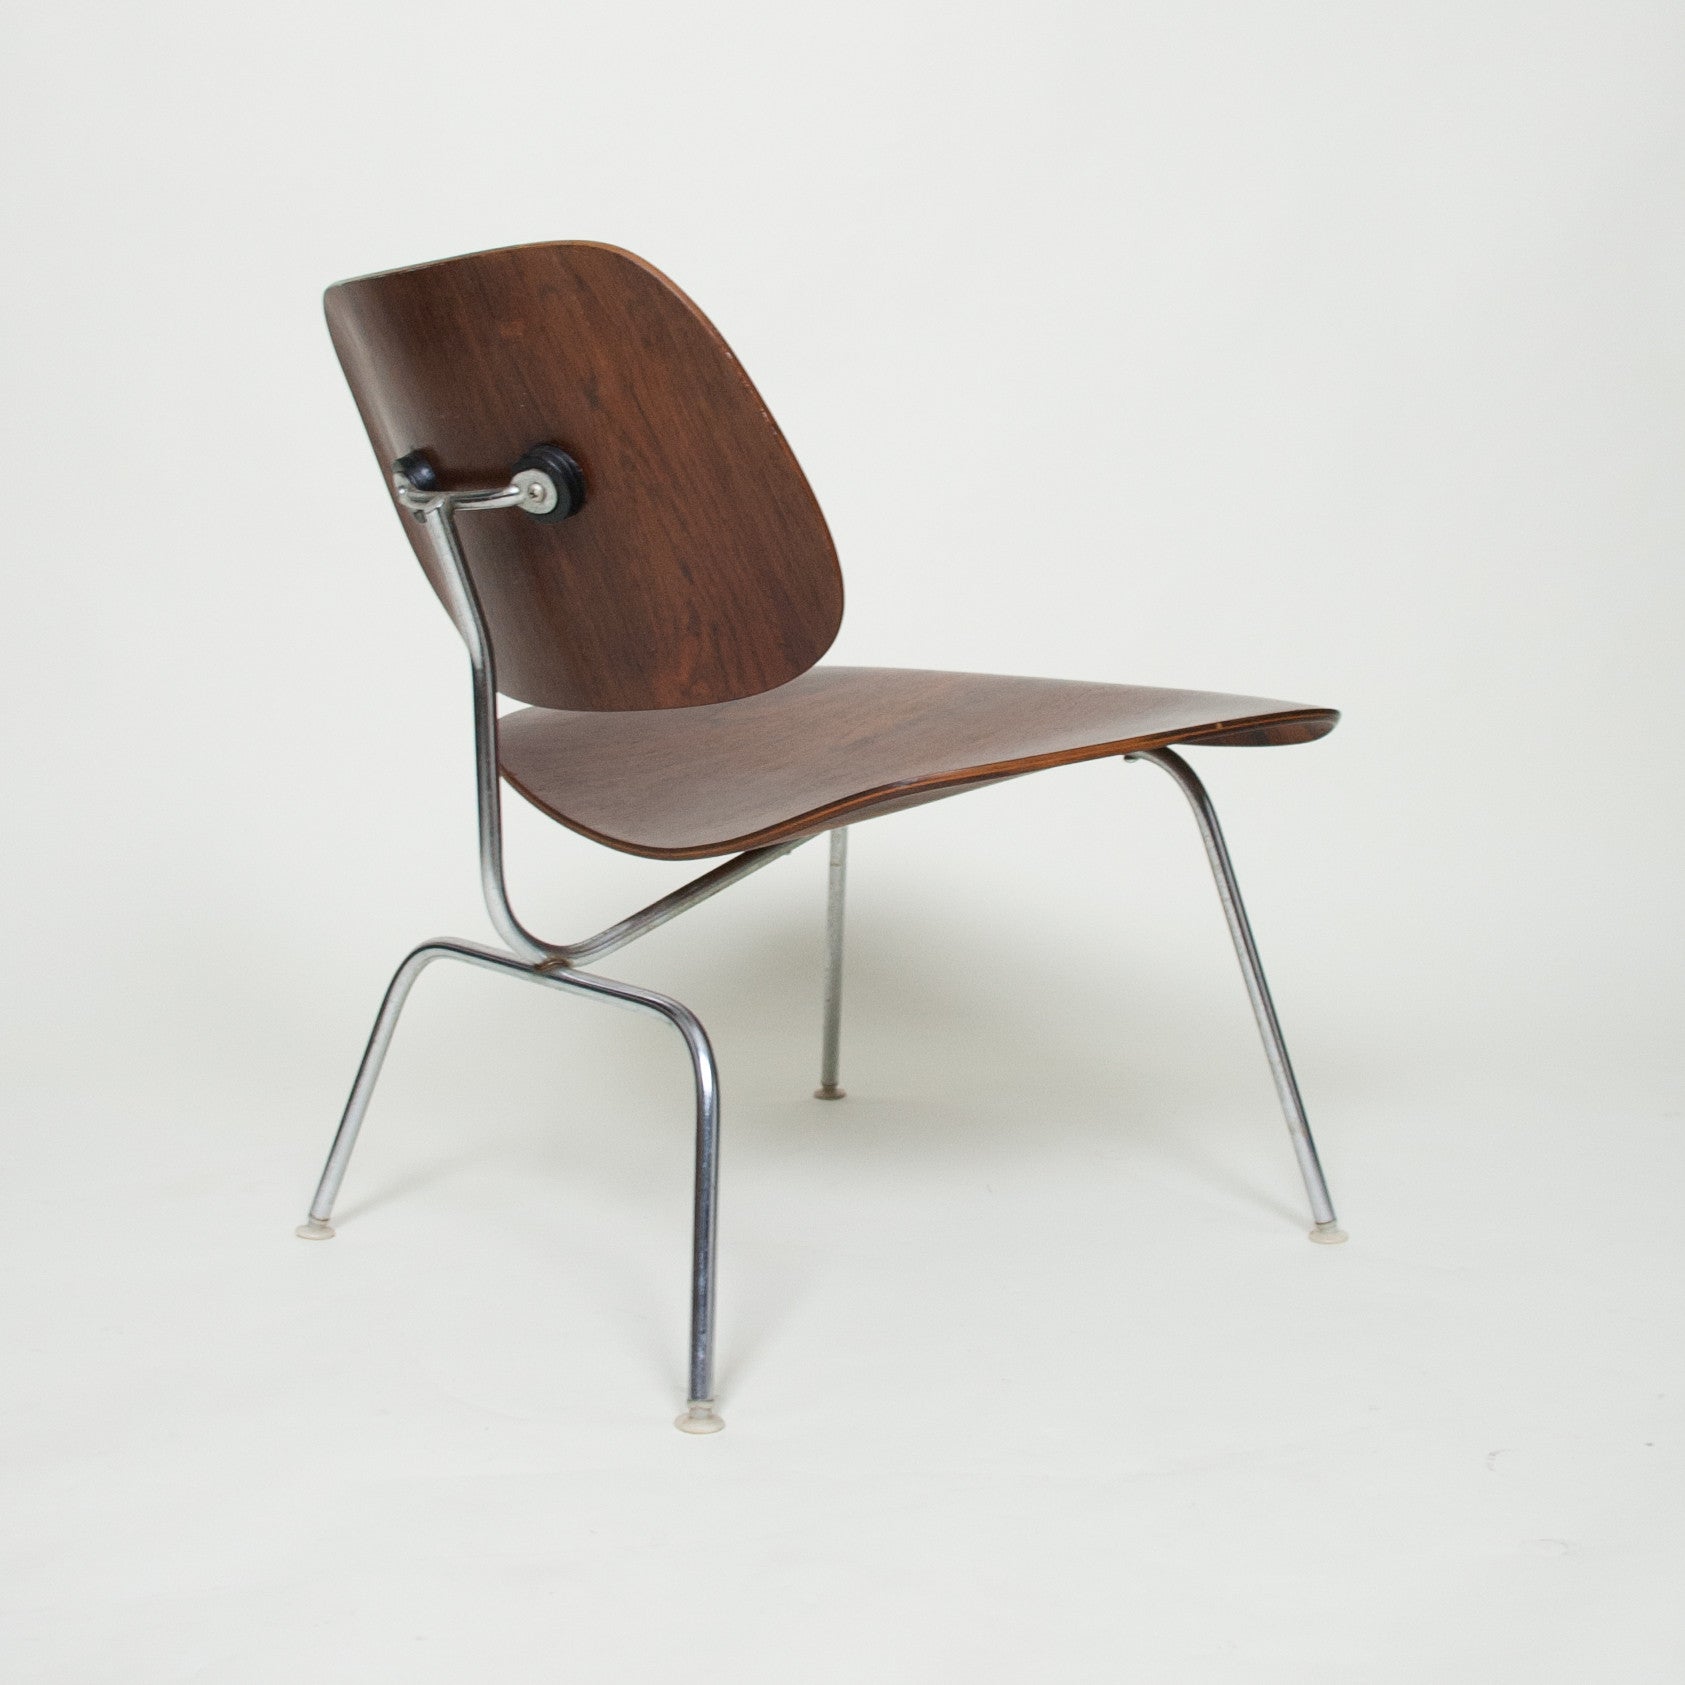 SOLD Eames Herman Miller Rare 1960s Rosewood LCM Lounge Chair